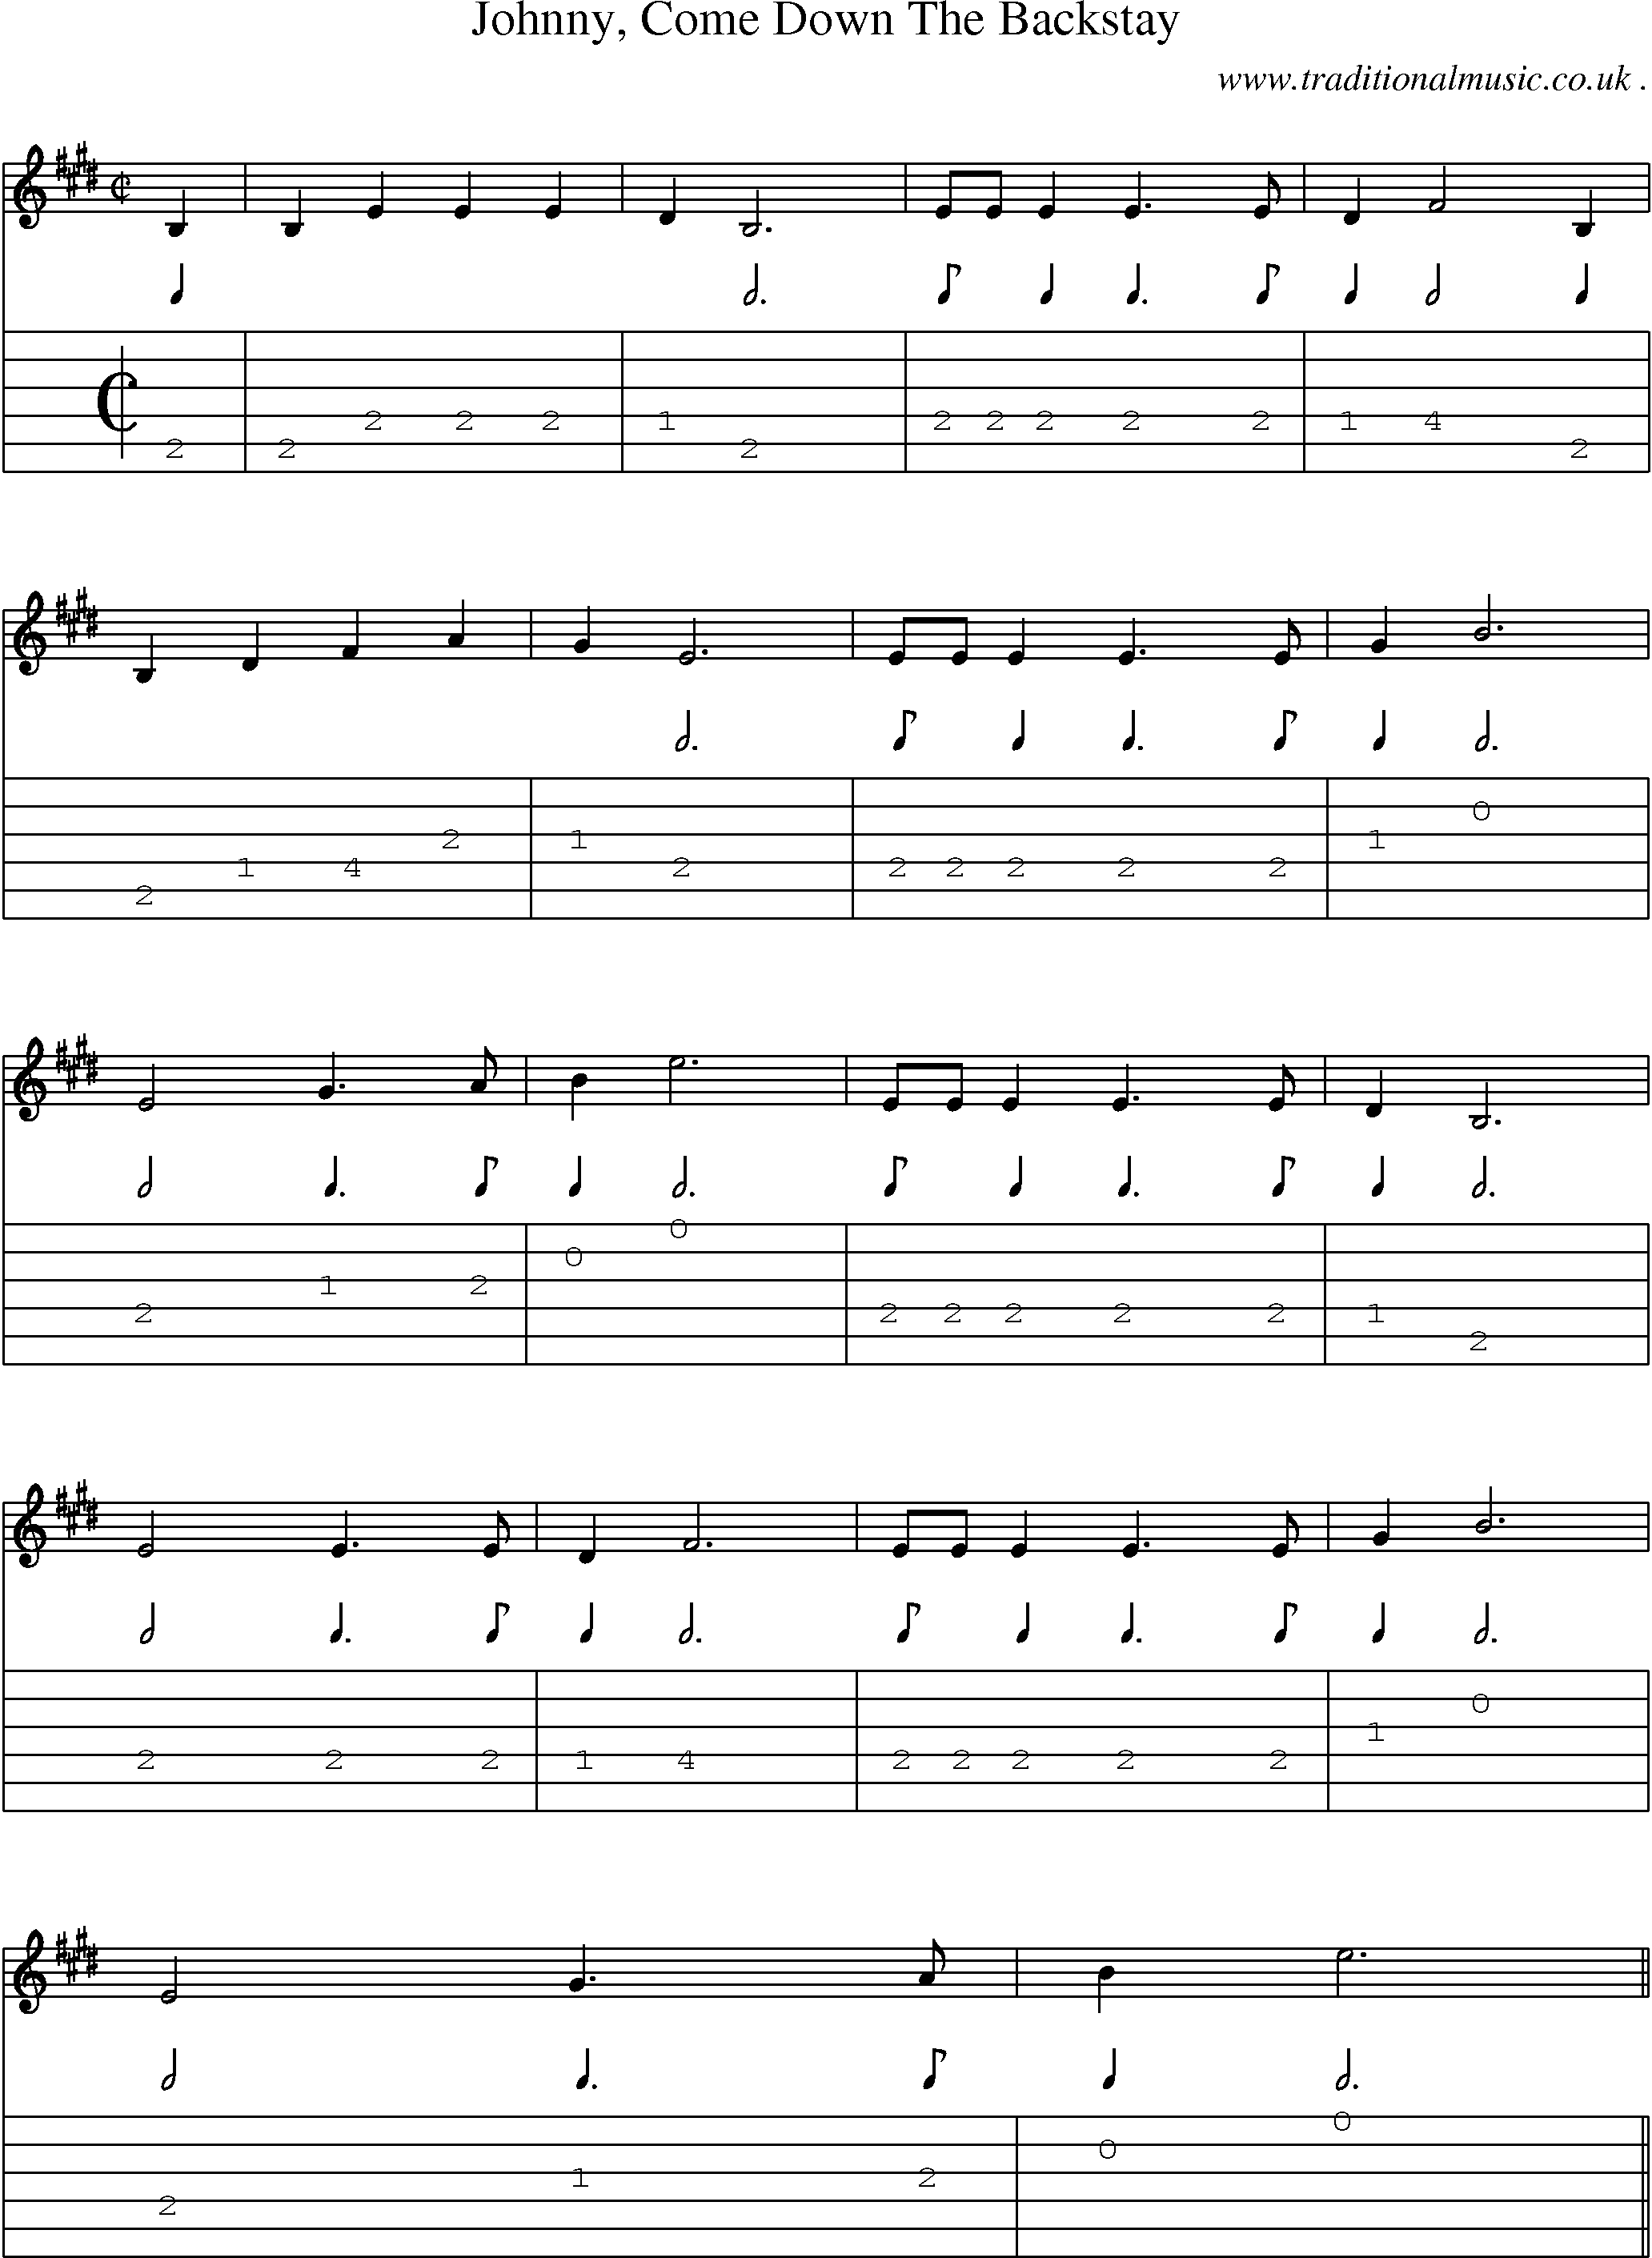 Sheet-Music and Guitar Tabs for Johnny Come Down The Backstay